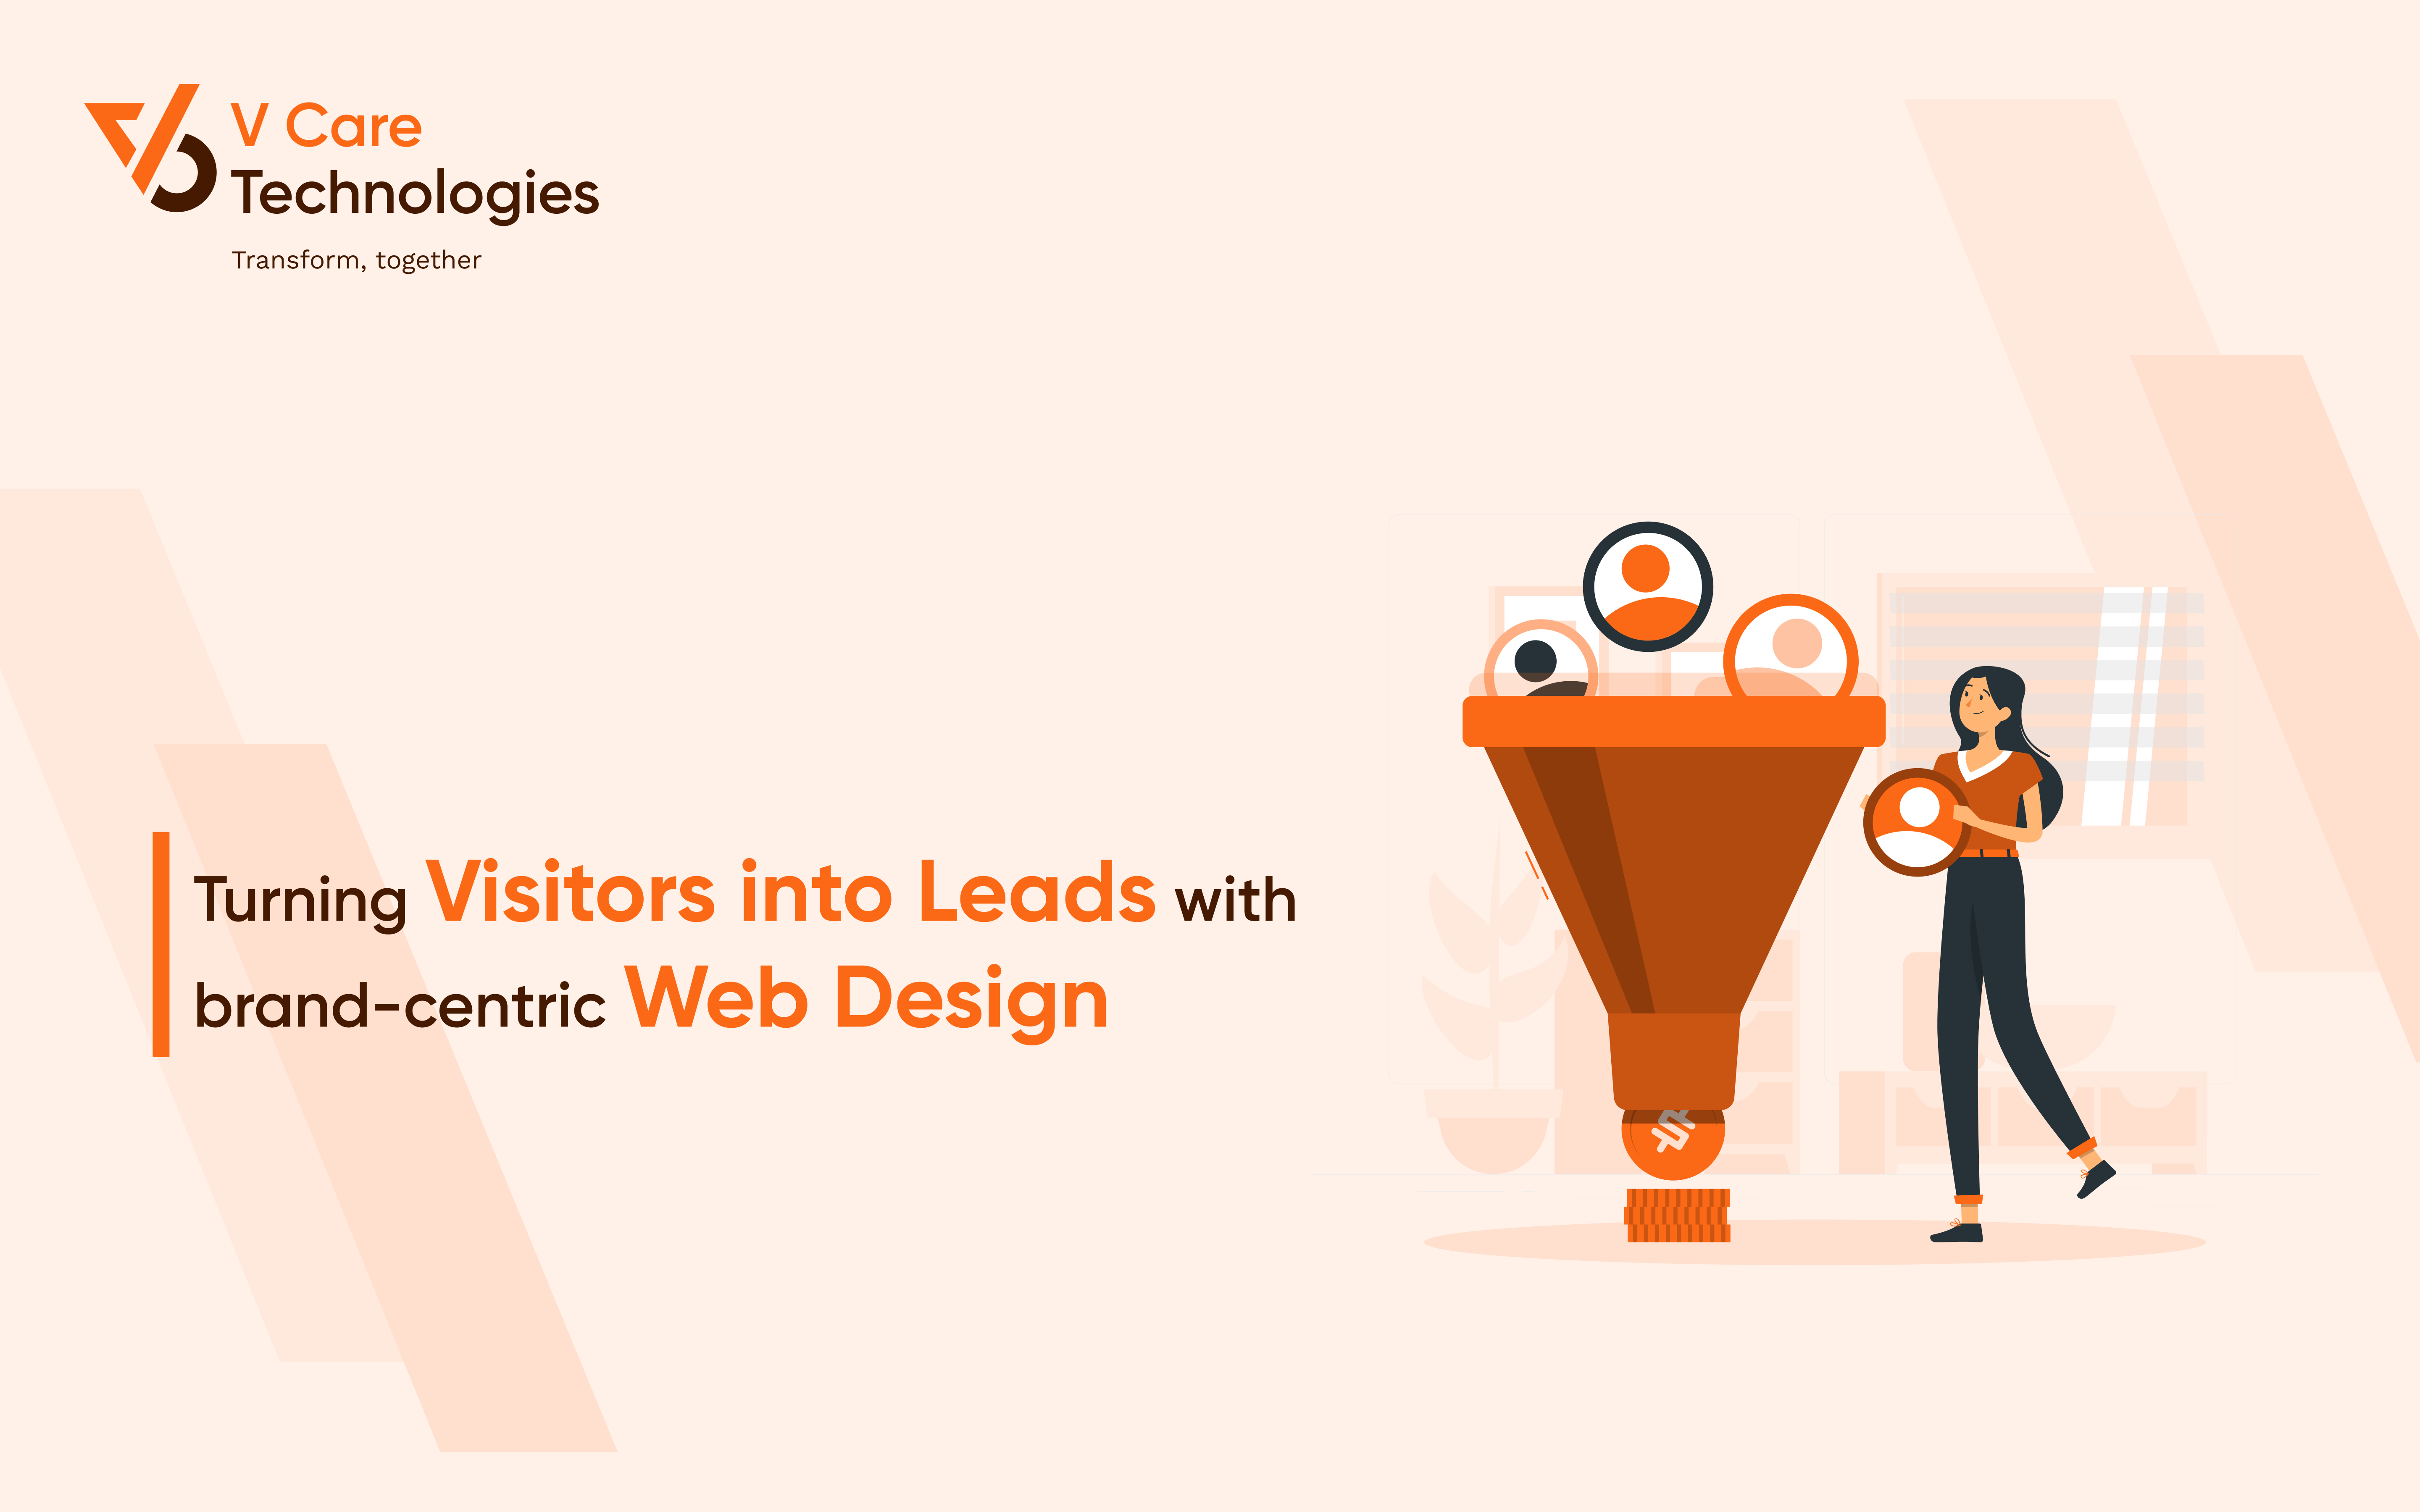 Turning Visitors into Leads with Brand-centric Web Design